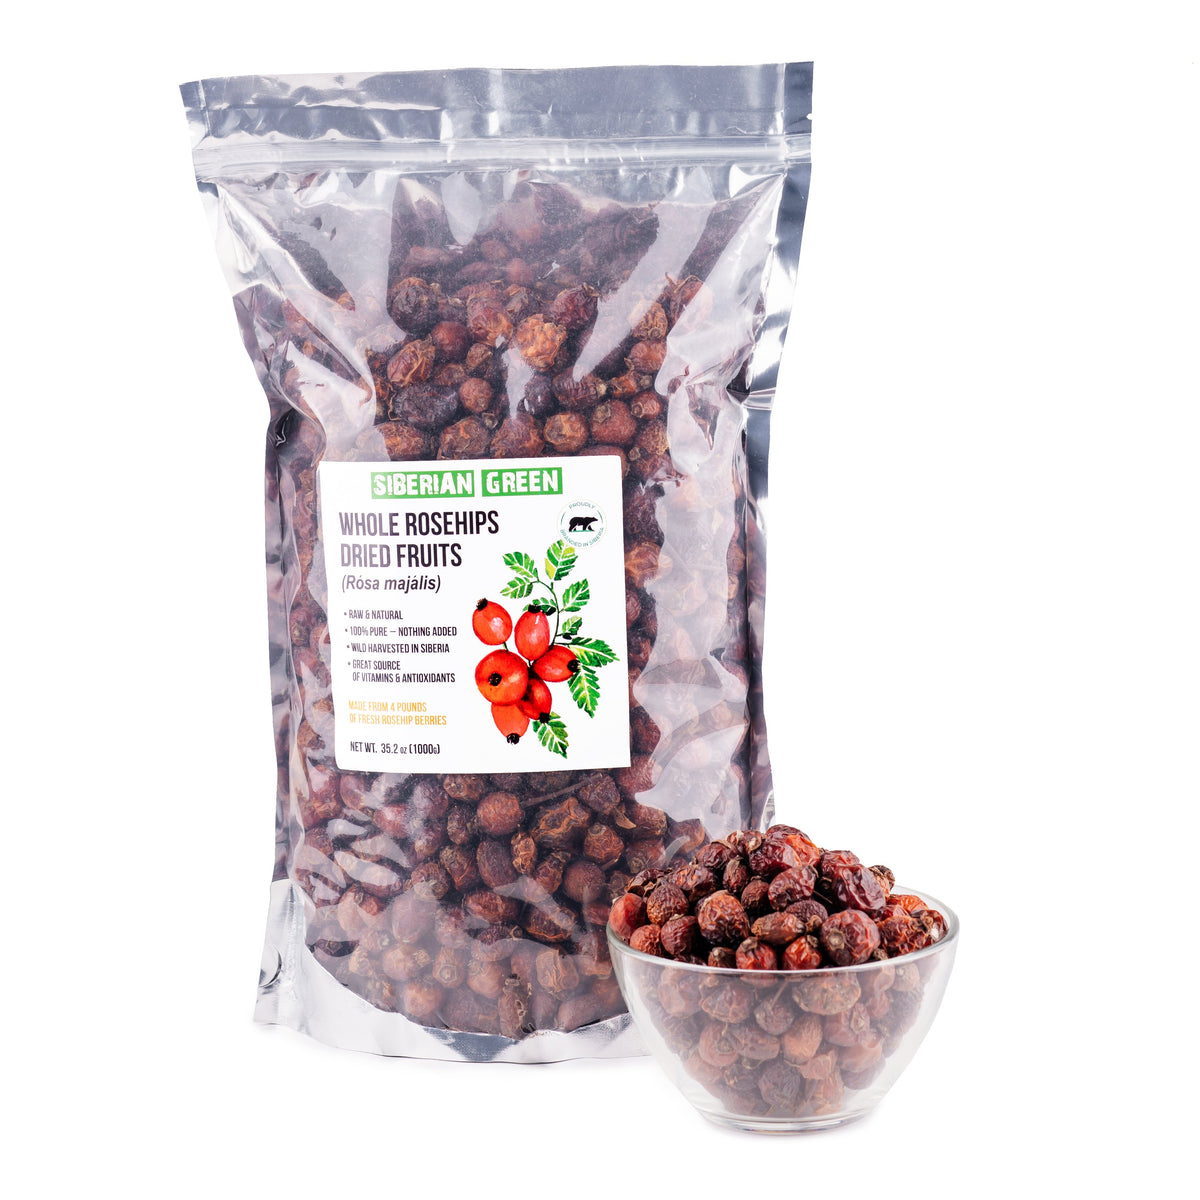 Siberian Dried Rose Hips Whole Seeds 1 kg (2.2 pounds) - Rosehips Herbal Tea Directly from Siberia Altai Mountains and Taiga